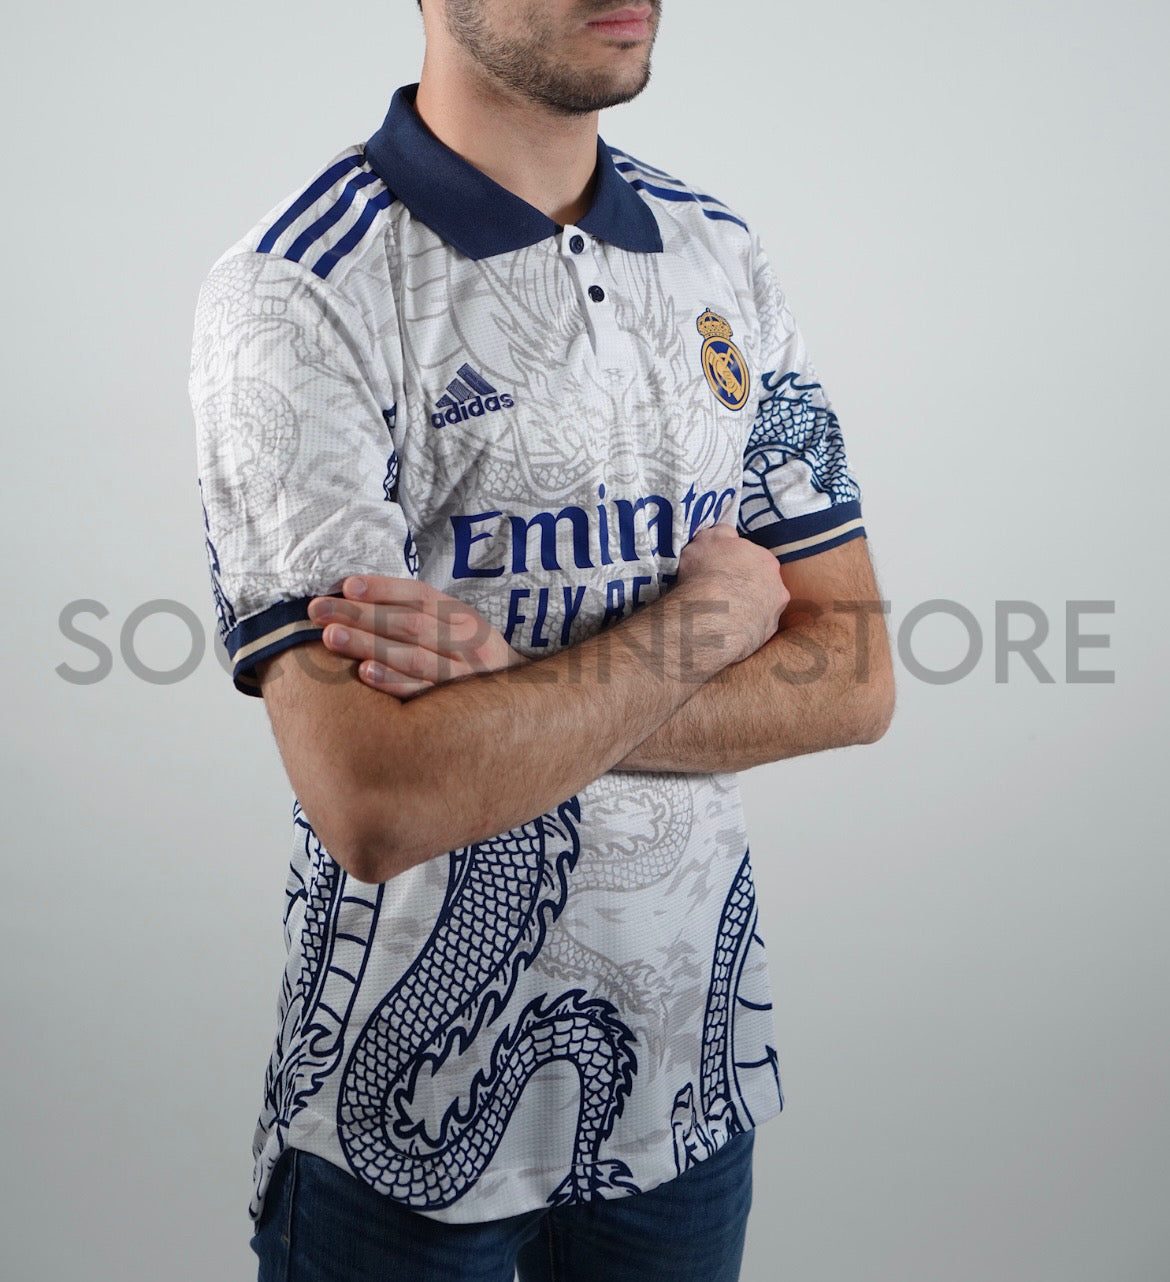 Real Madrid x Concept Kit